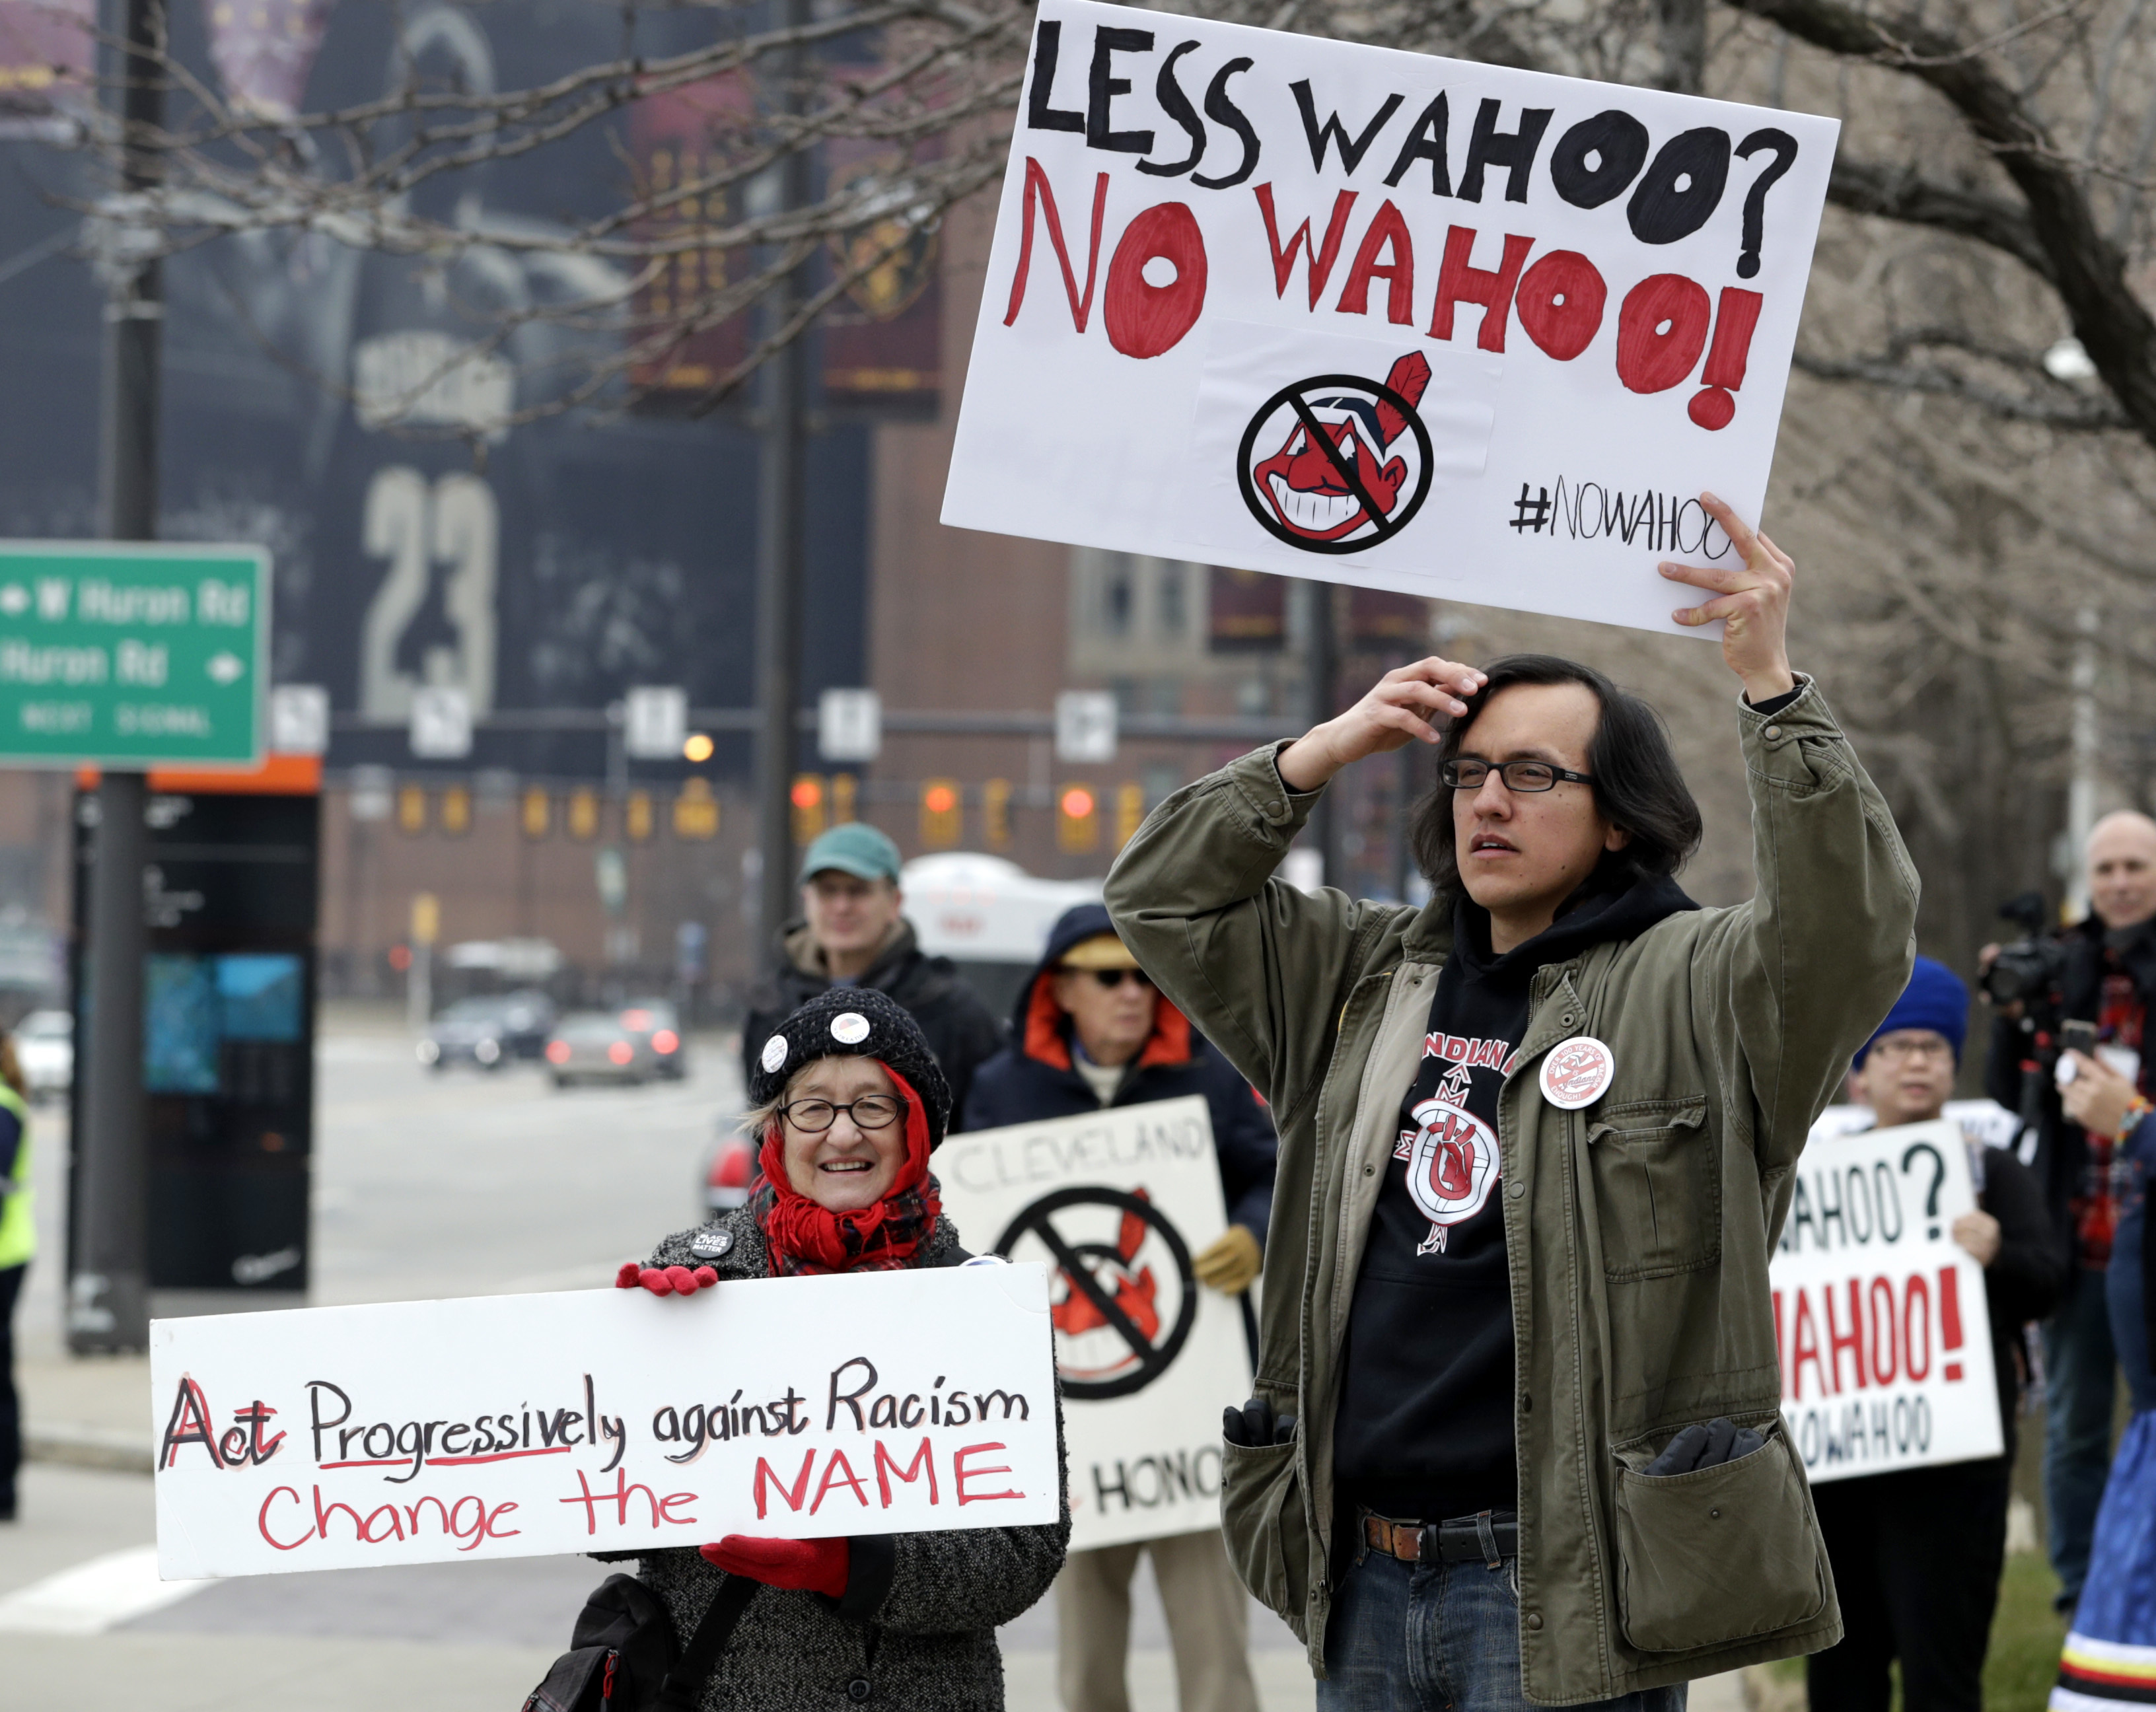 Indians are right to remove Chief Wahoo